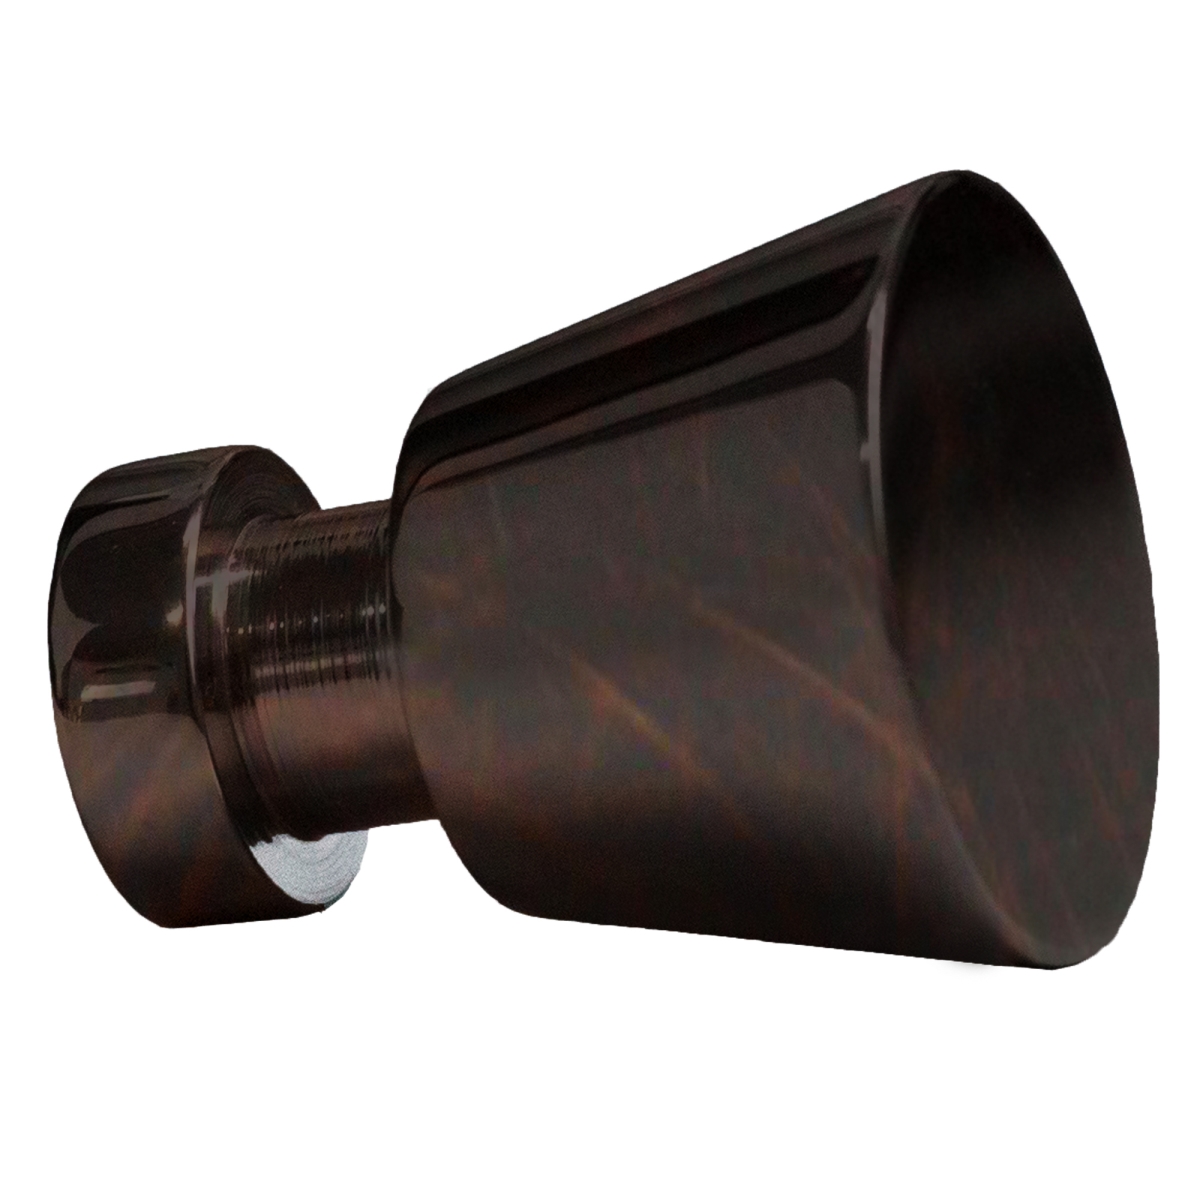 Ai-22090 1 In. Roxy Series Round Stainless Steel Cabinet Knob, Oil Rubbed Bronze